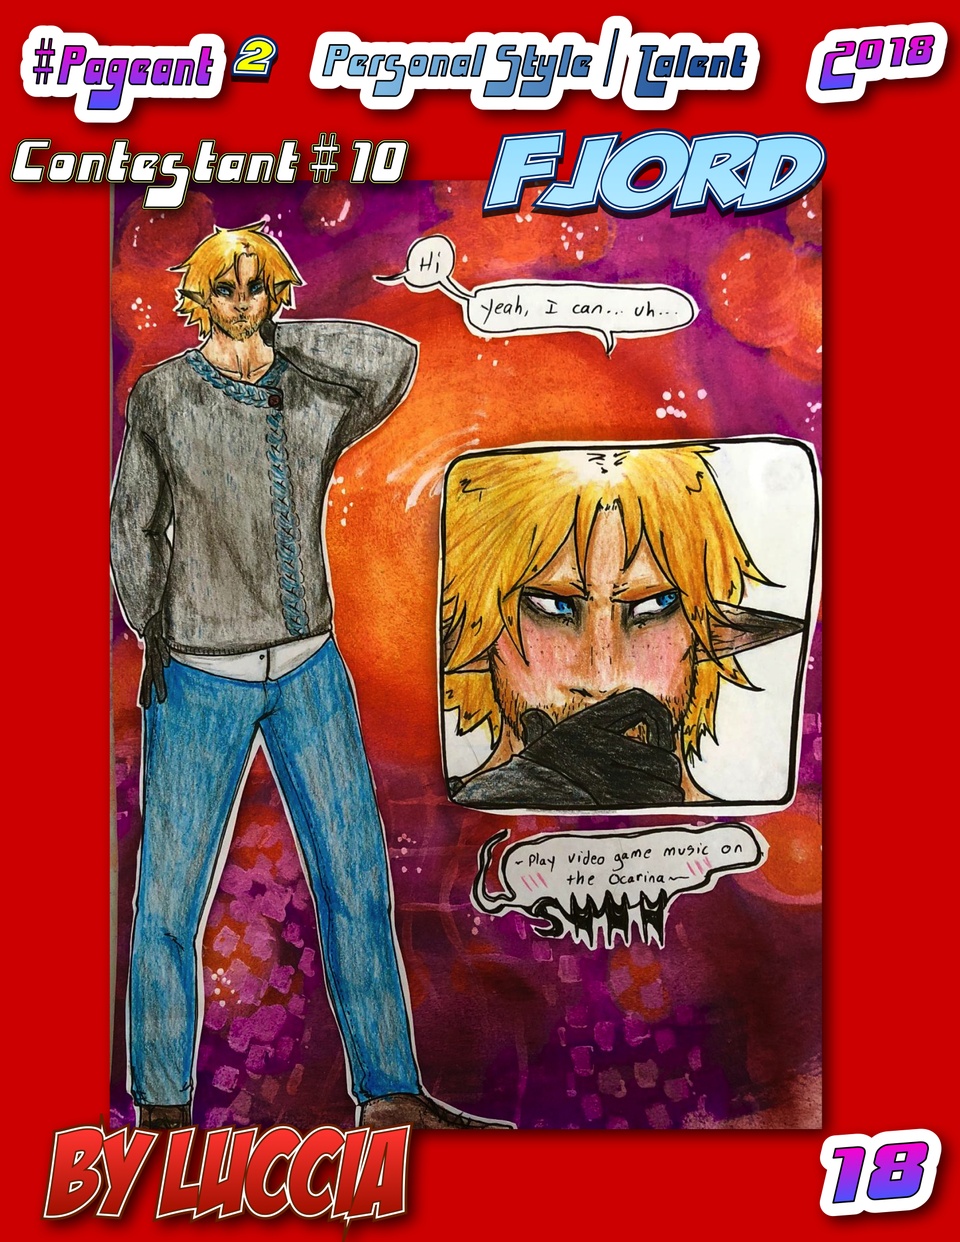 #Pageant #2 Pg. 18 : Personal Style / Talent Category : Contestant #10 : Fjord